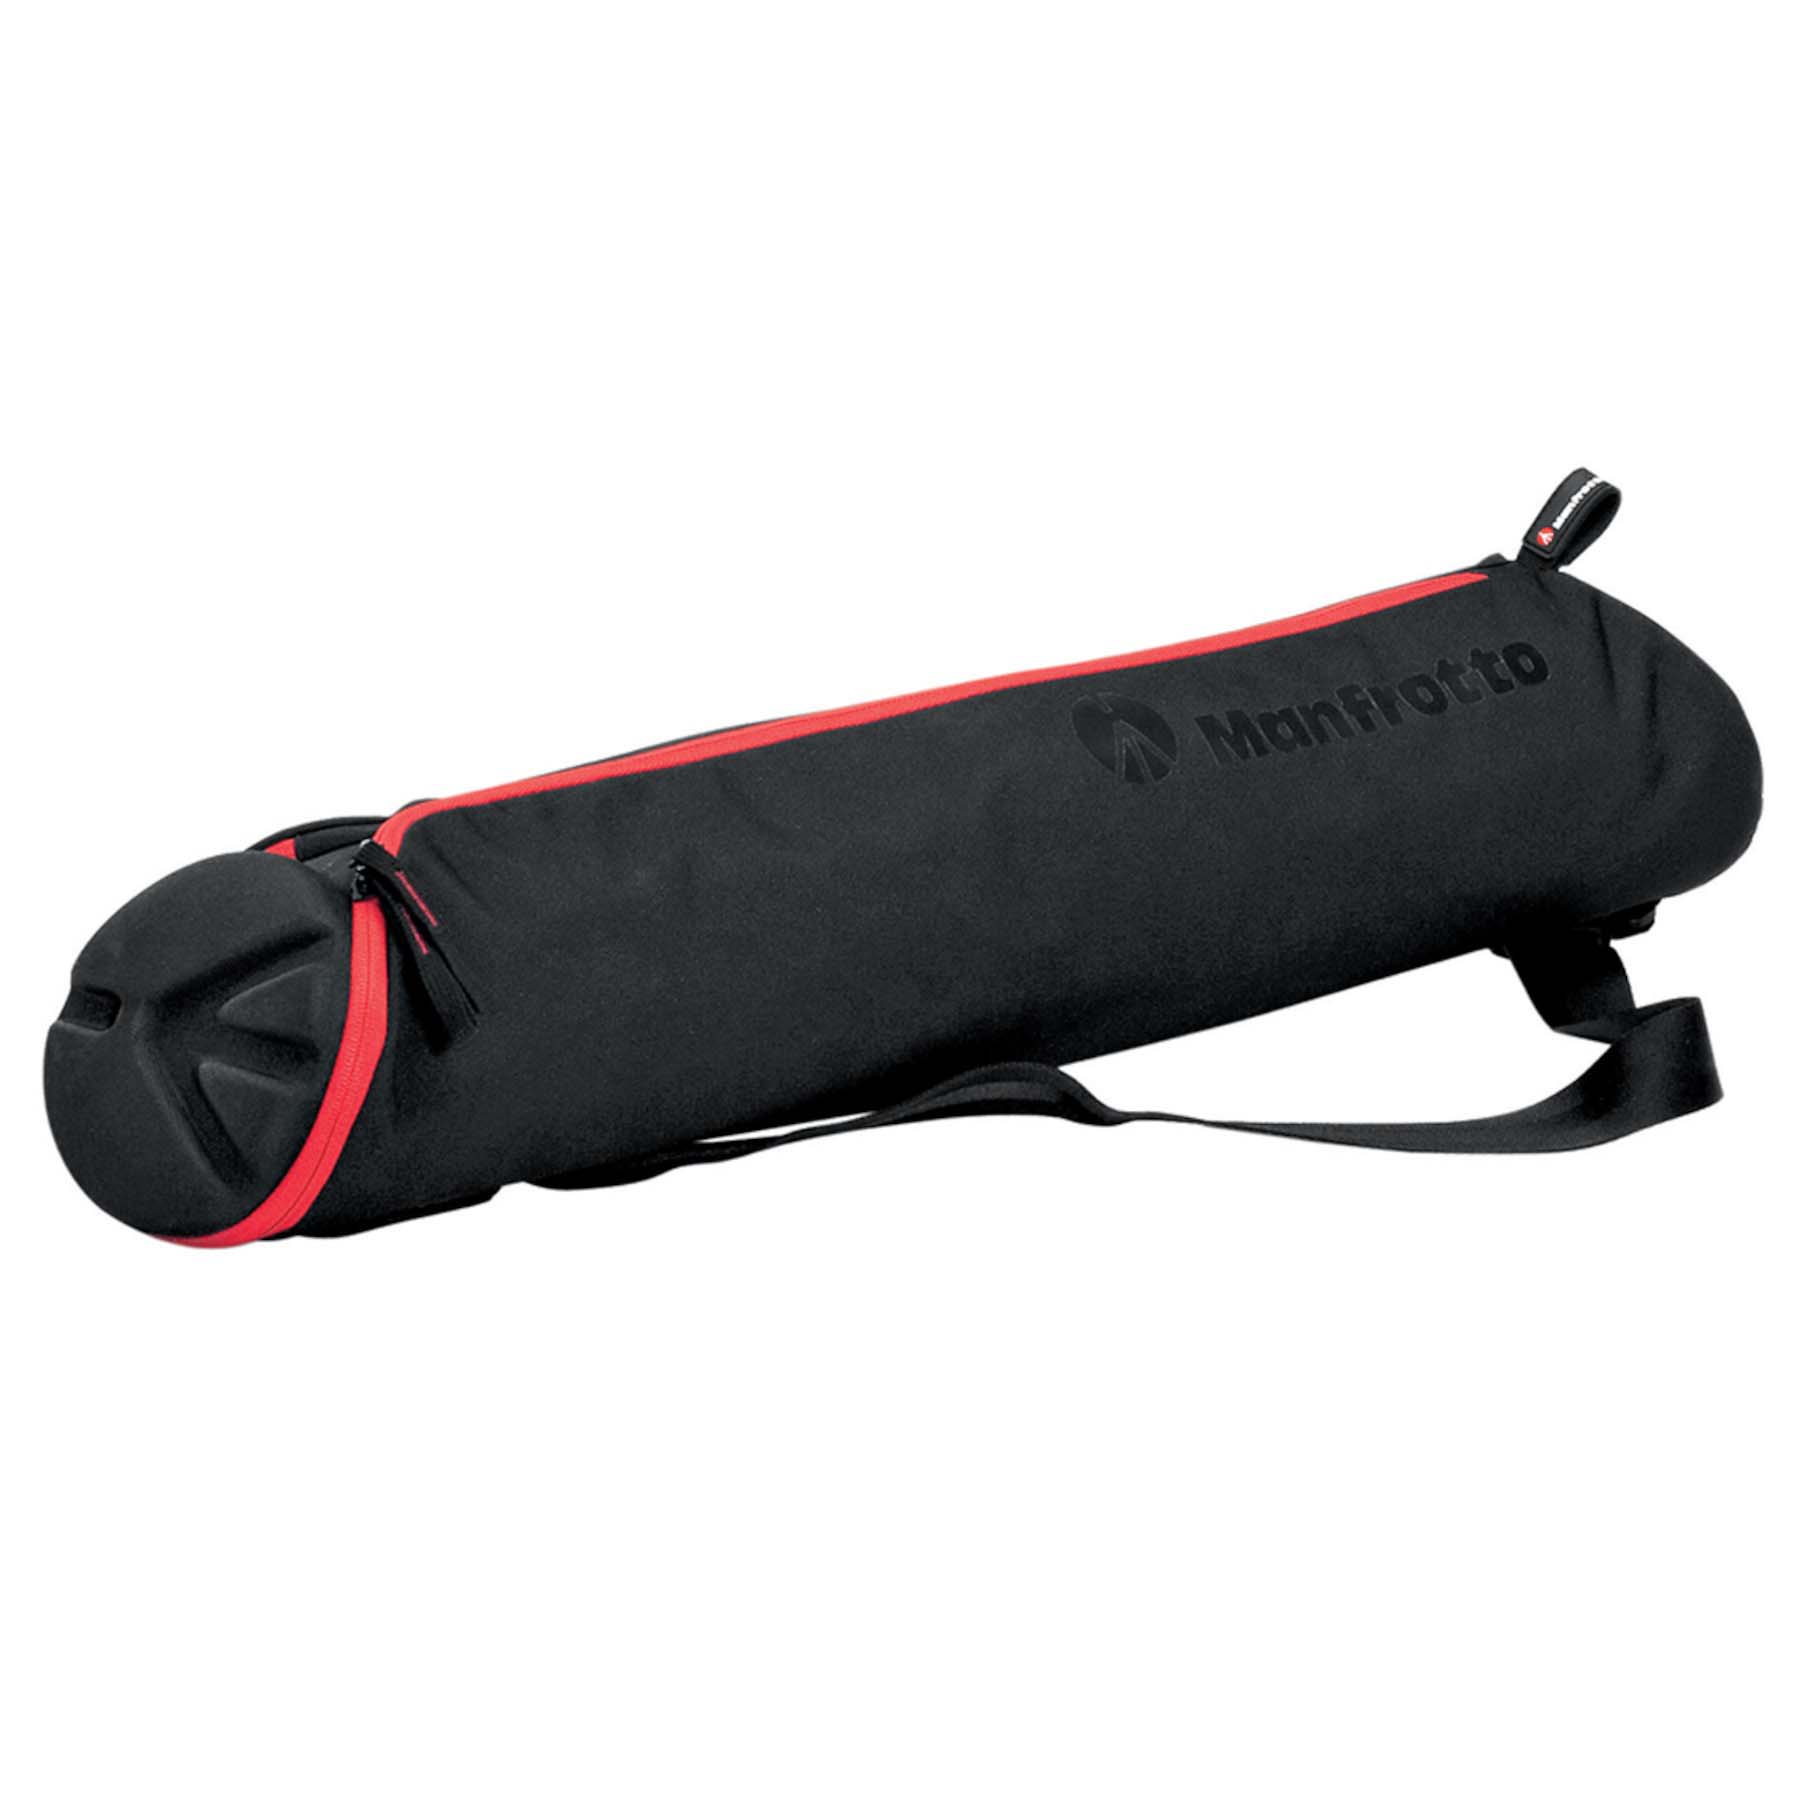 ESTUCHE MANFROTTO MBAG-70N SIN ACOLCHAR 70CM MANFROTTO 